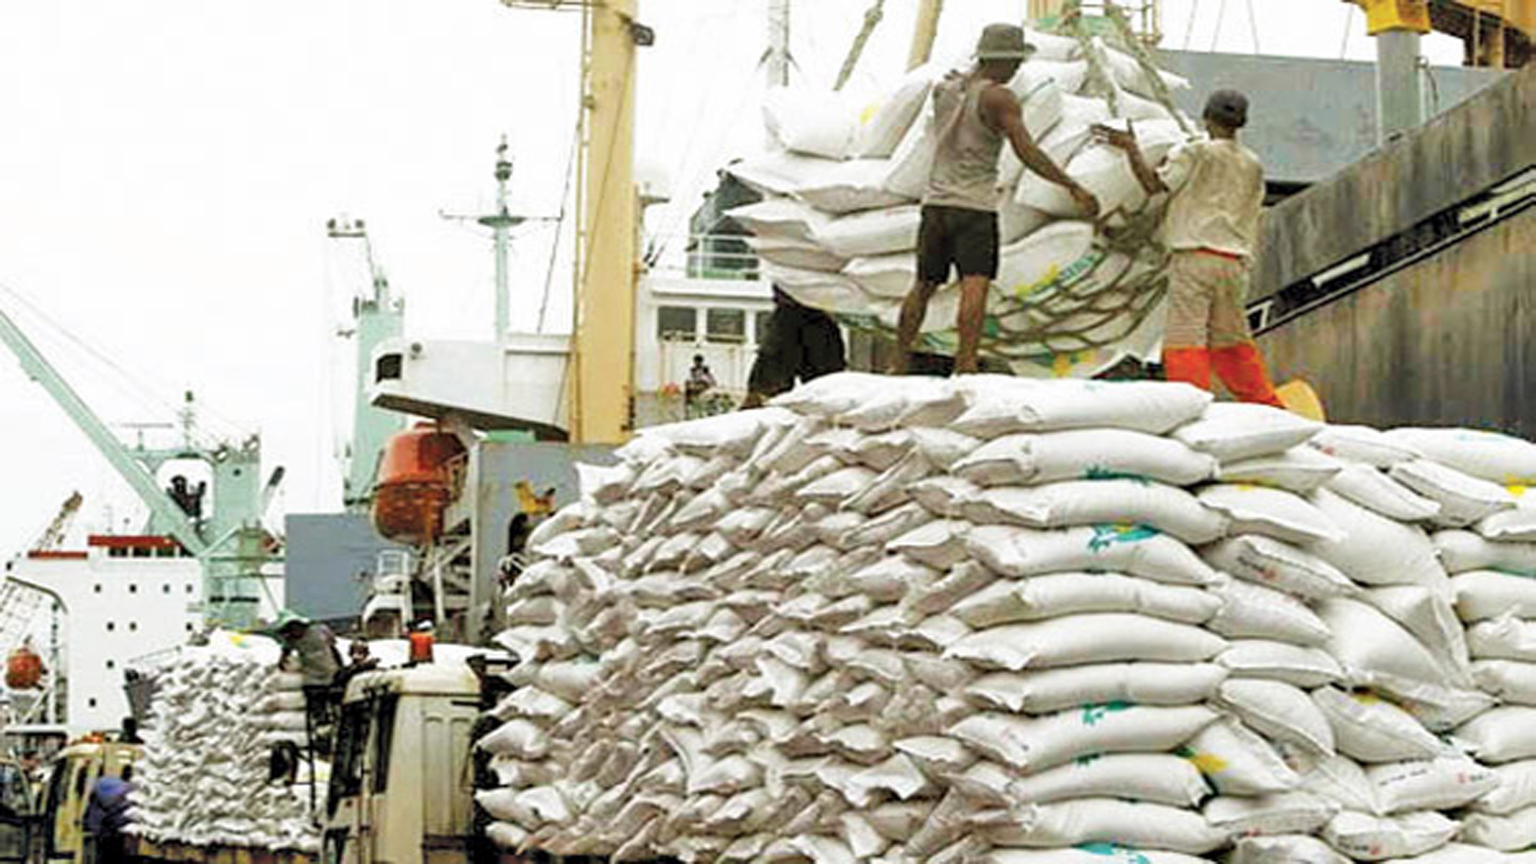 40,000 metric tons of rice arrives in Sri Lanka under Indian loan assistance